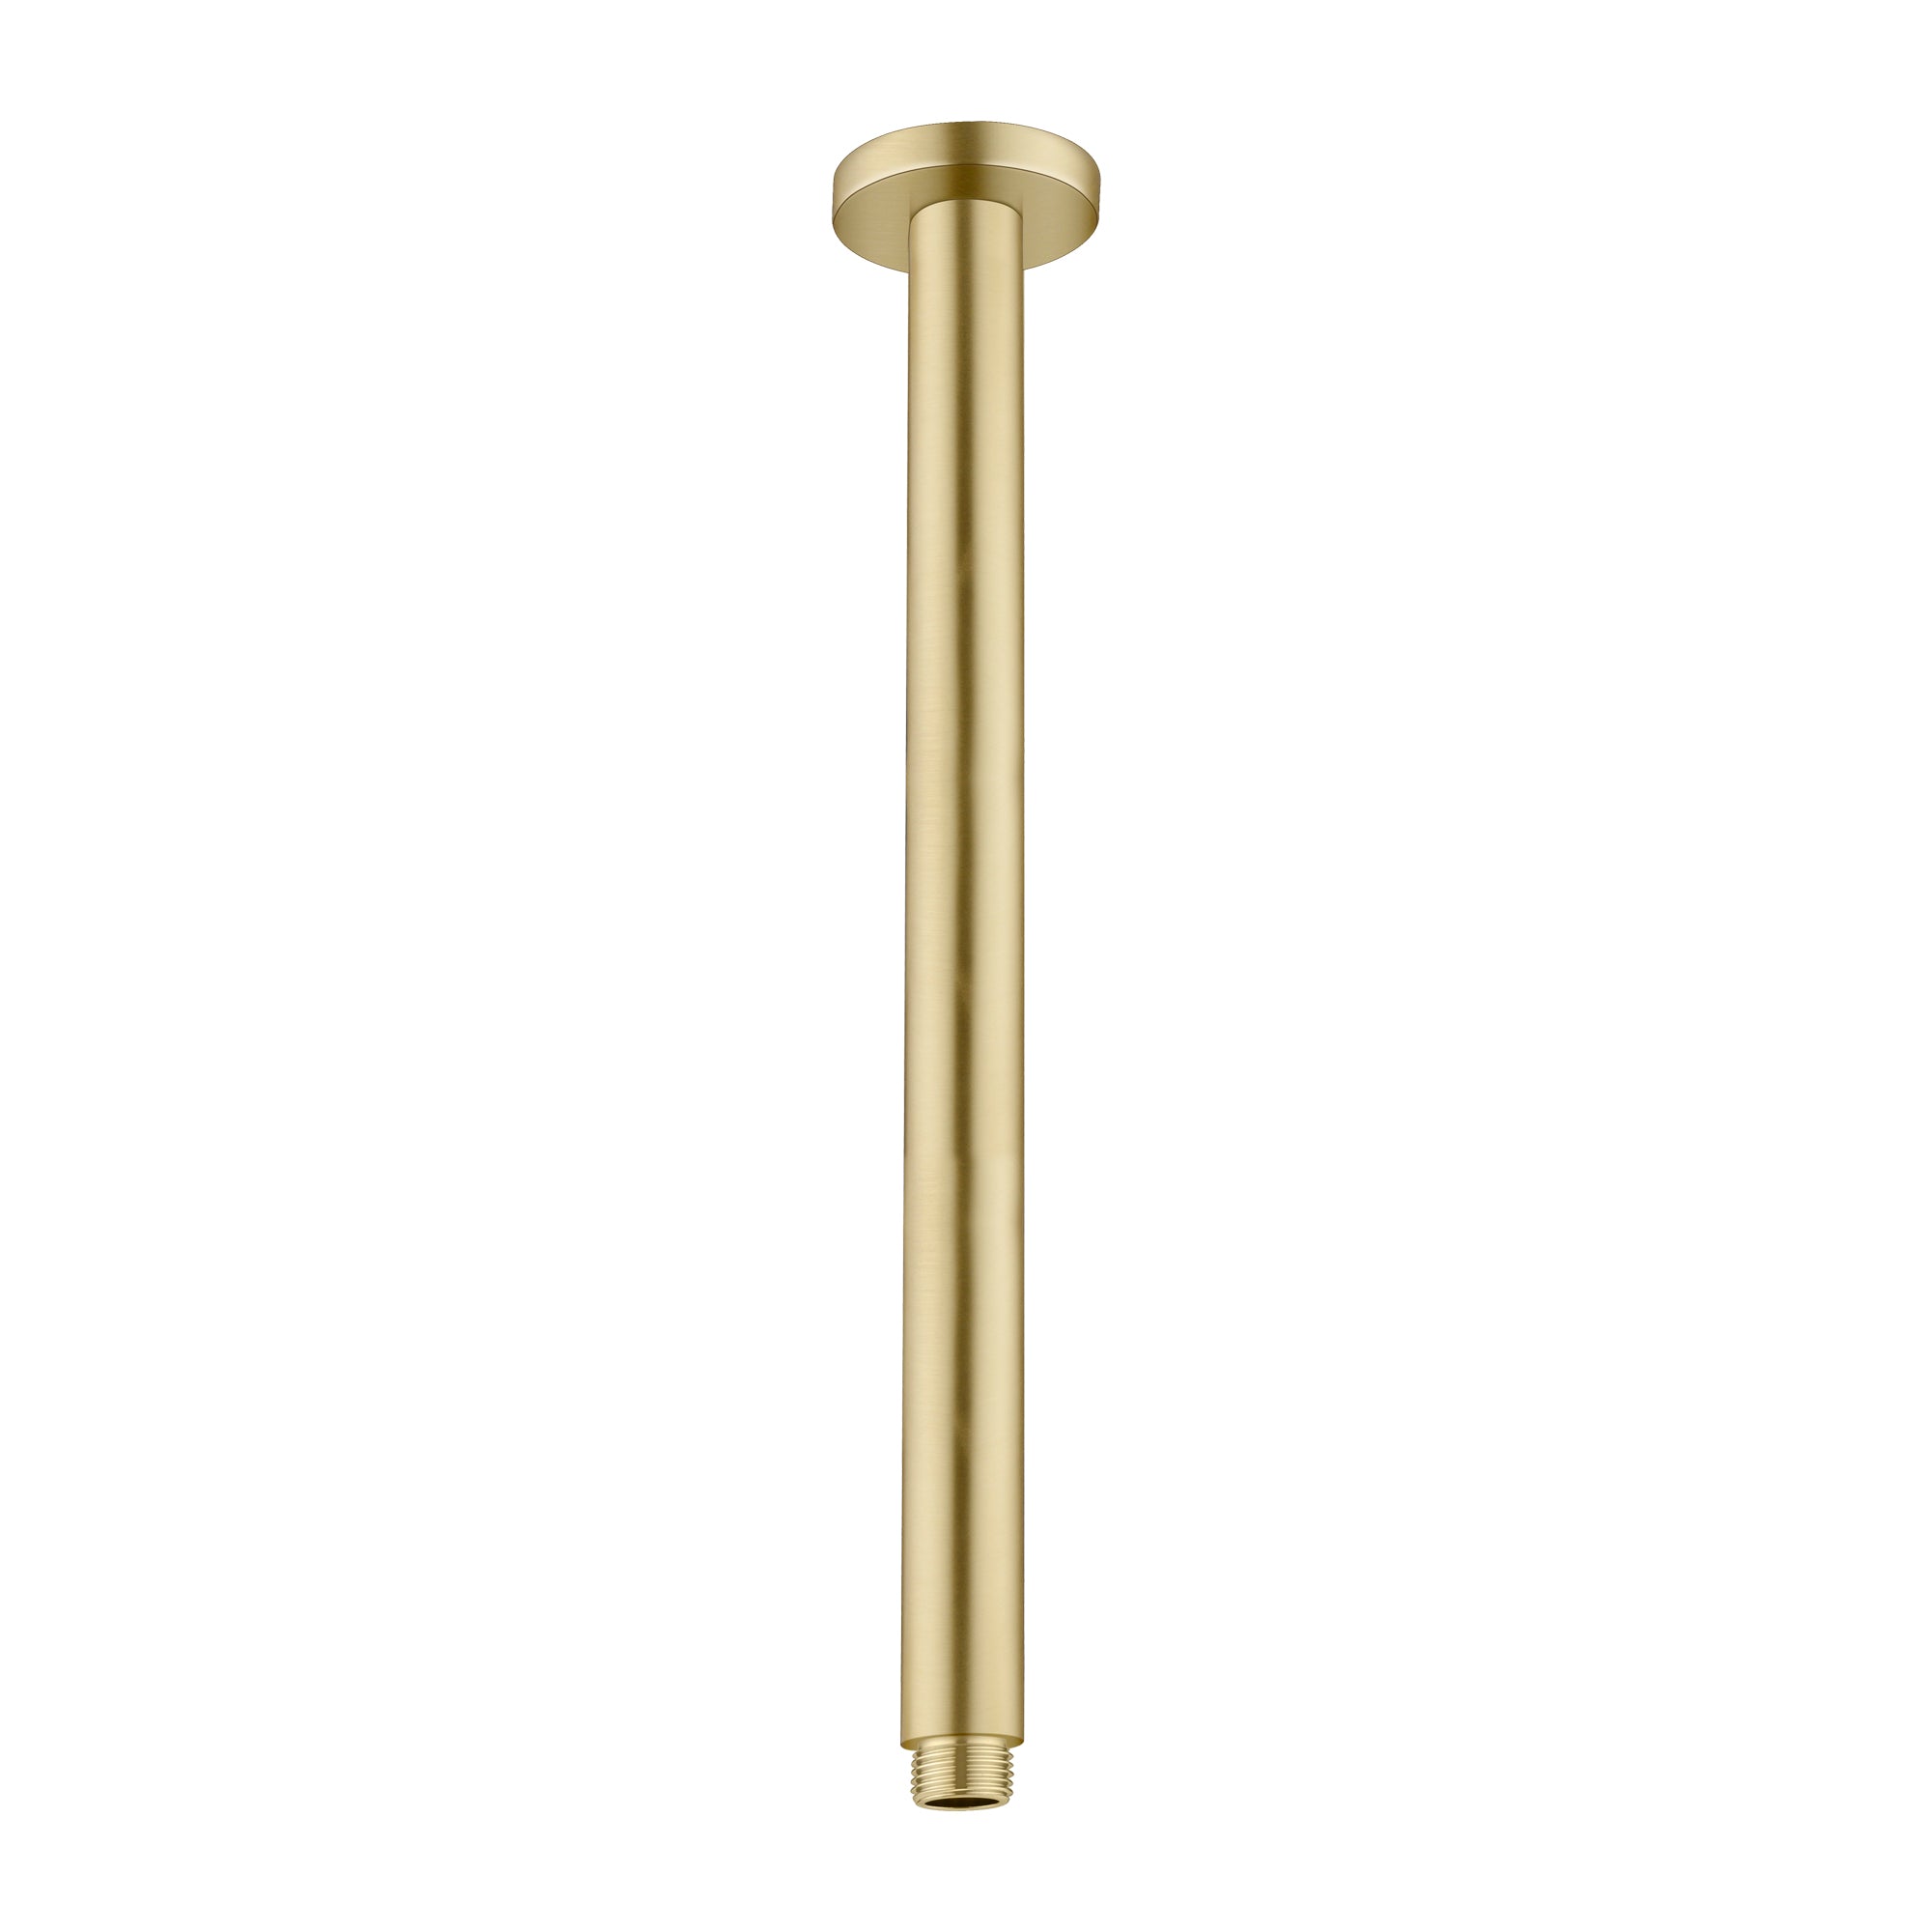 ROUND CEILING ARM 300MM LENGTH BRUSHED GOLD